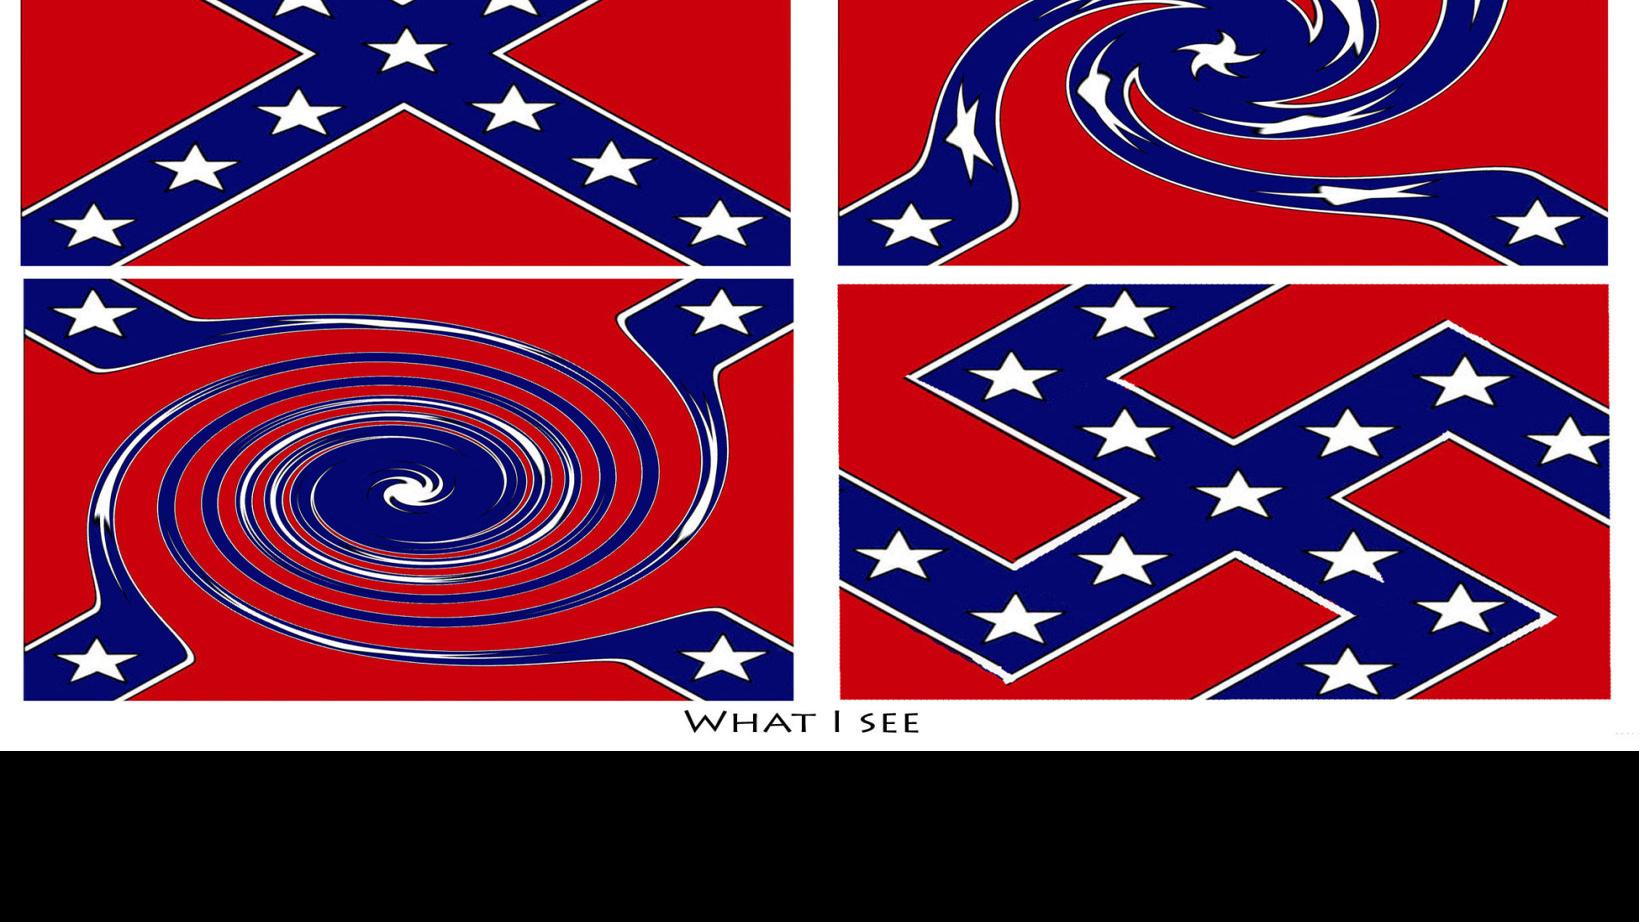 Reed The Confederate Battle Flag Is A Symbol Of Resistance - blox piece flags